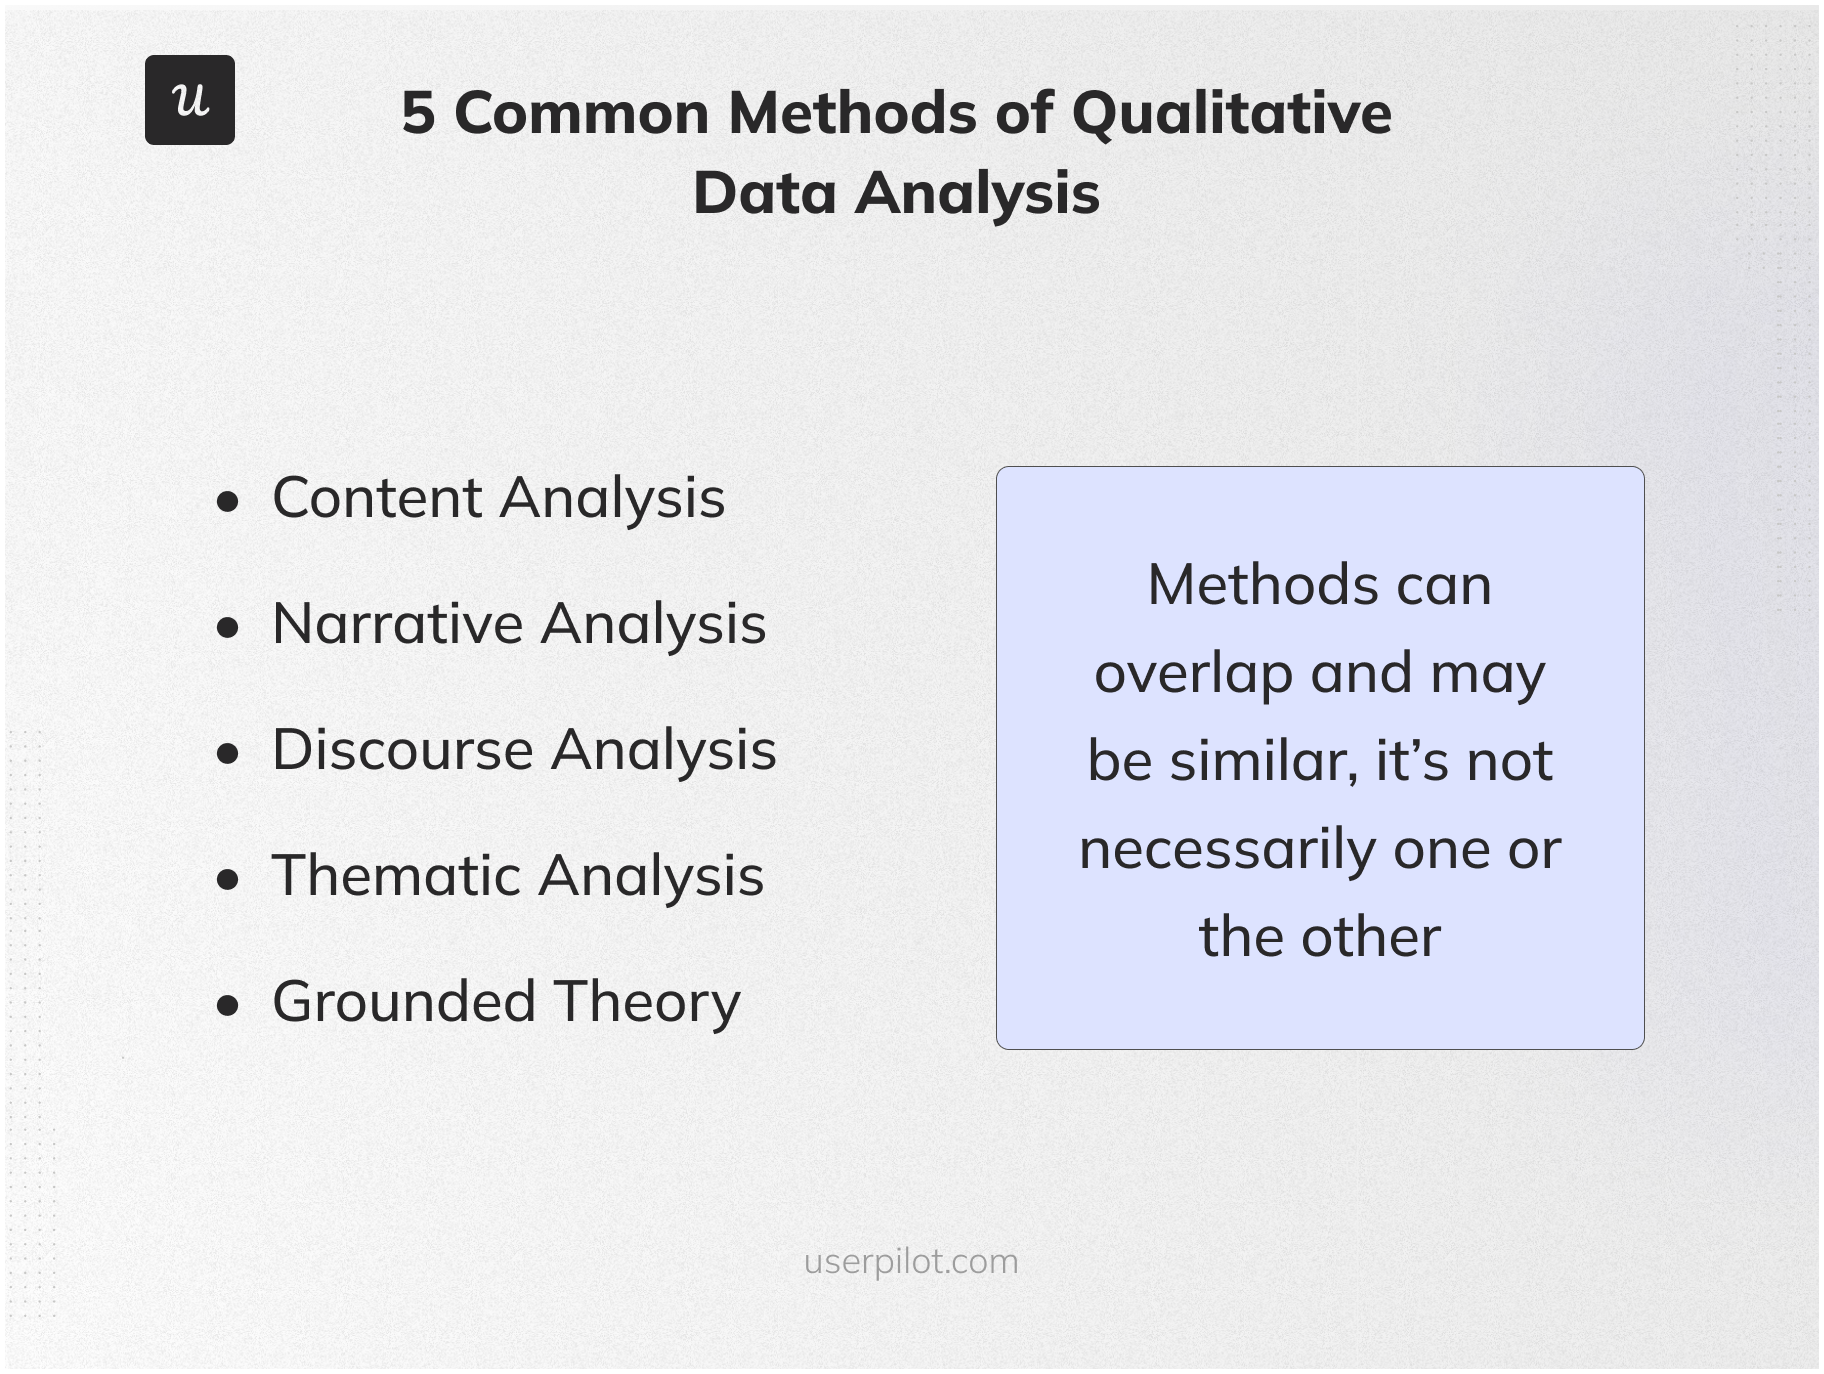 what data analysis is used for qualitative research